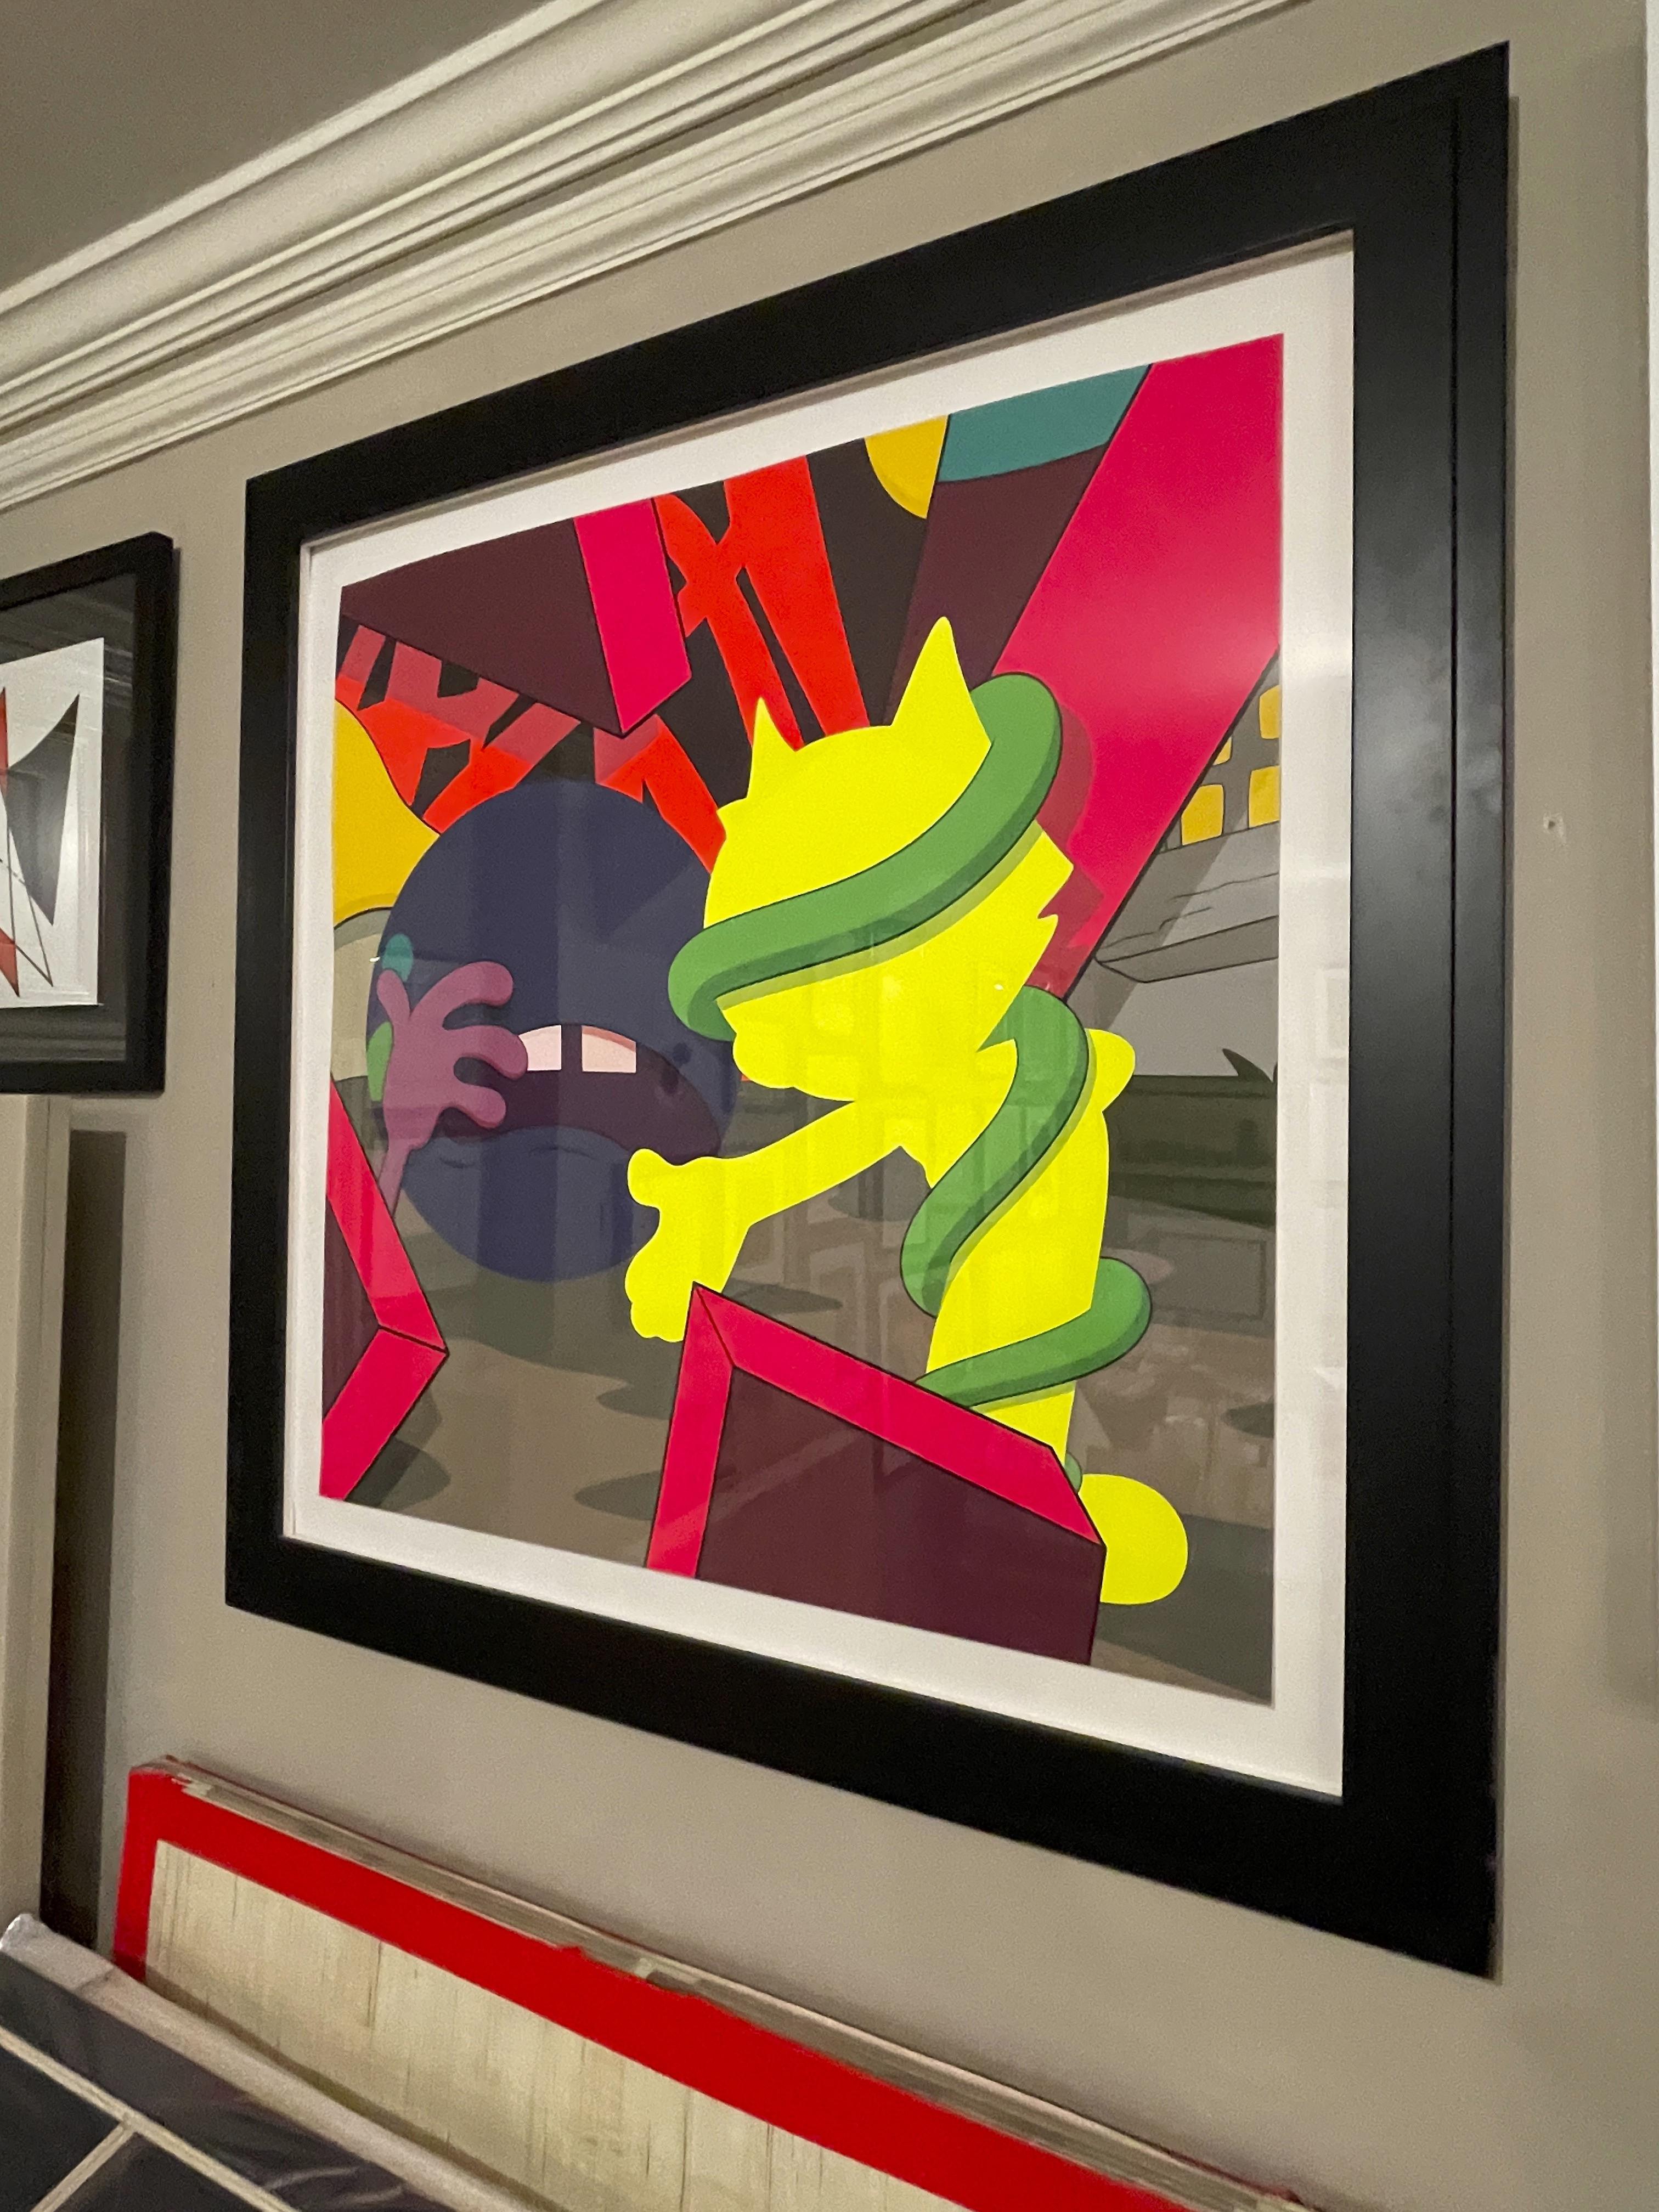 Presenting the Past - Black Figurative Print by KAWS